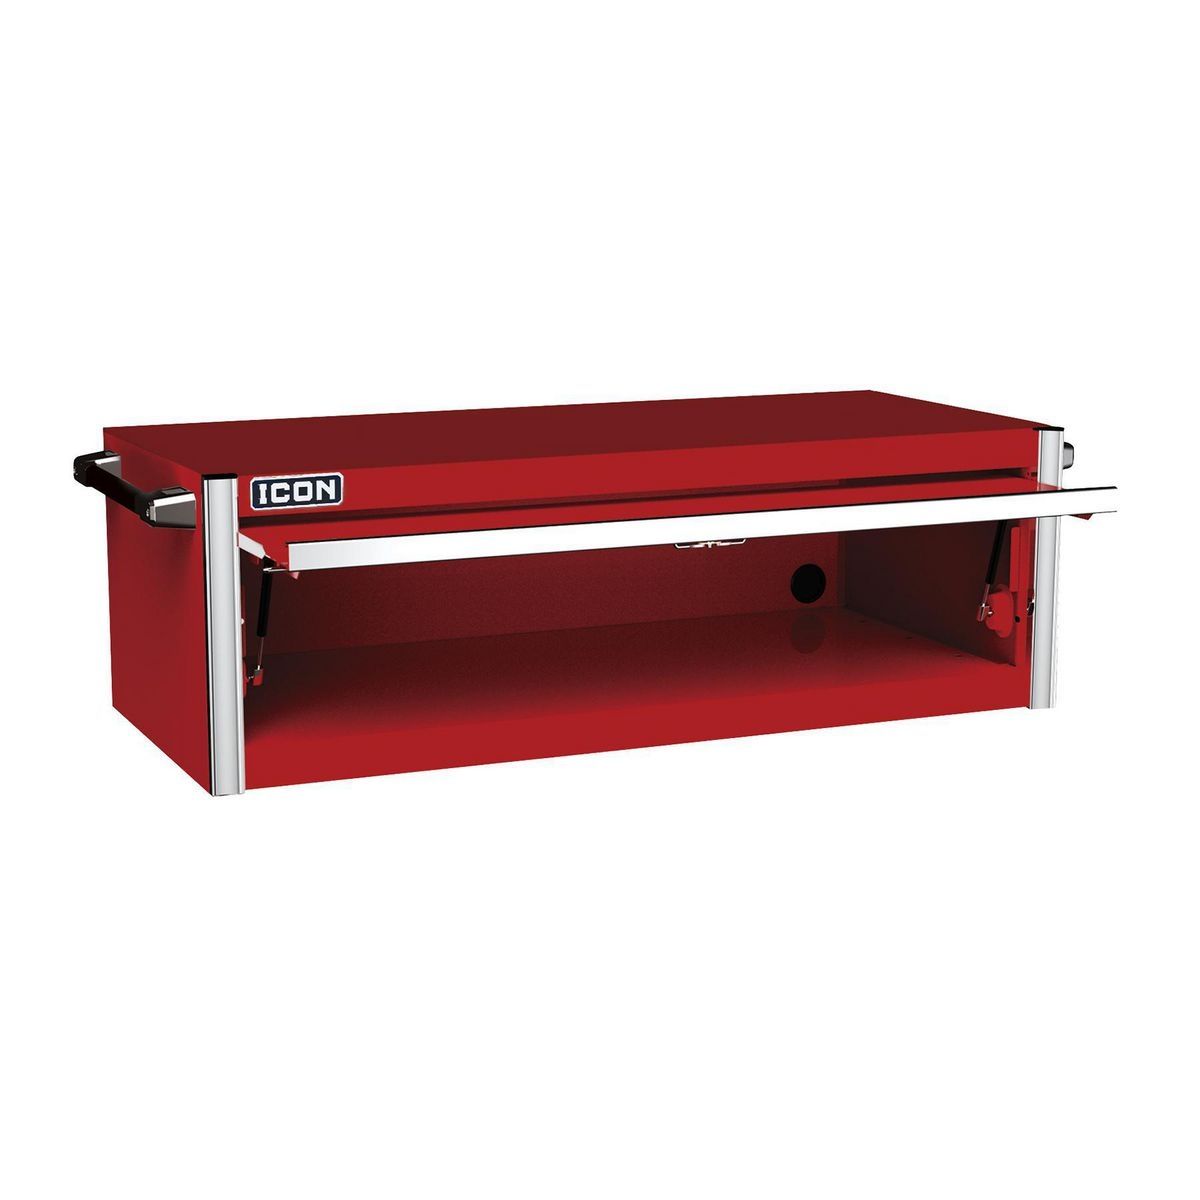 ICON 56 in. Professional Overhead Cab, Red